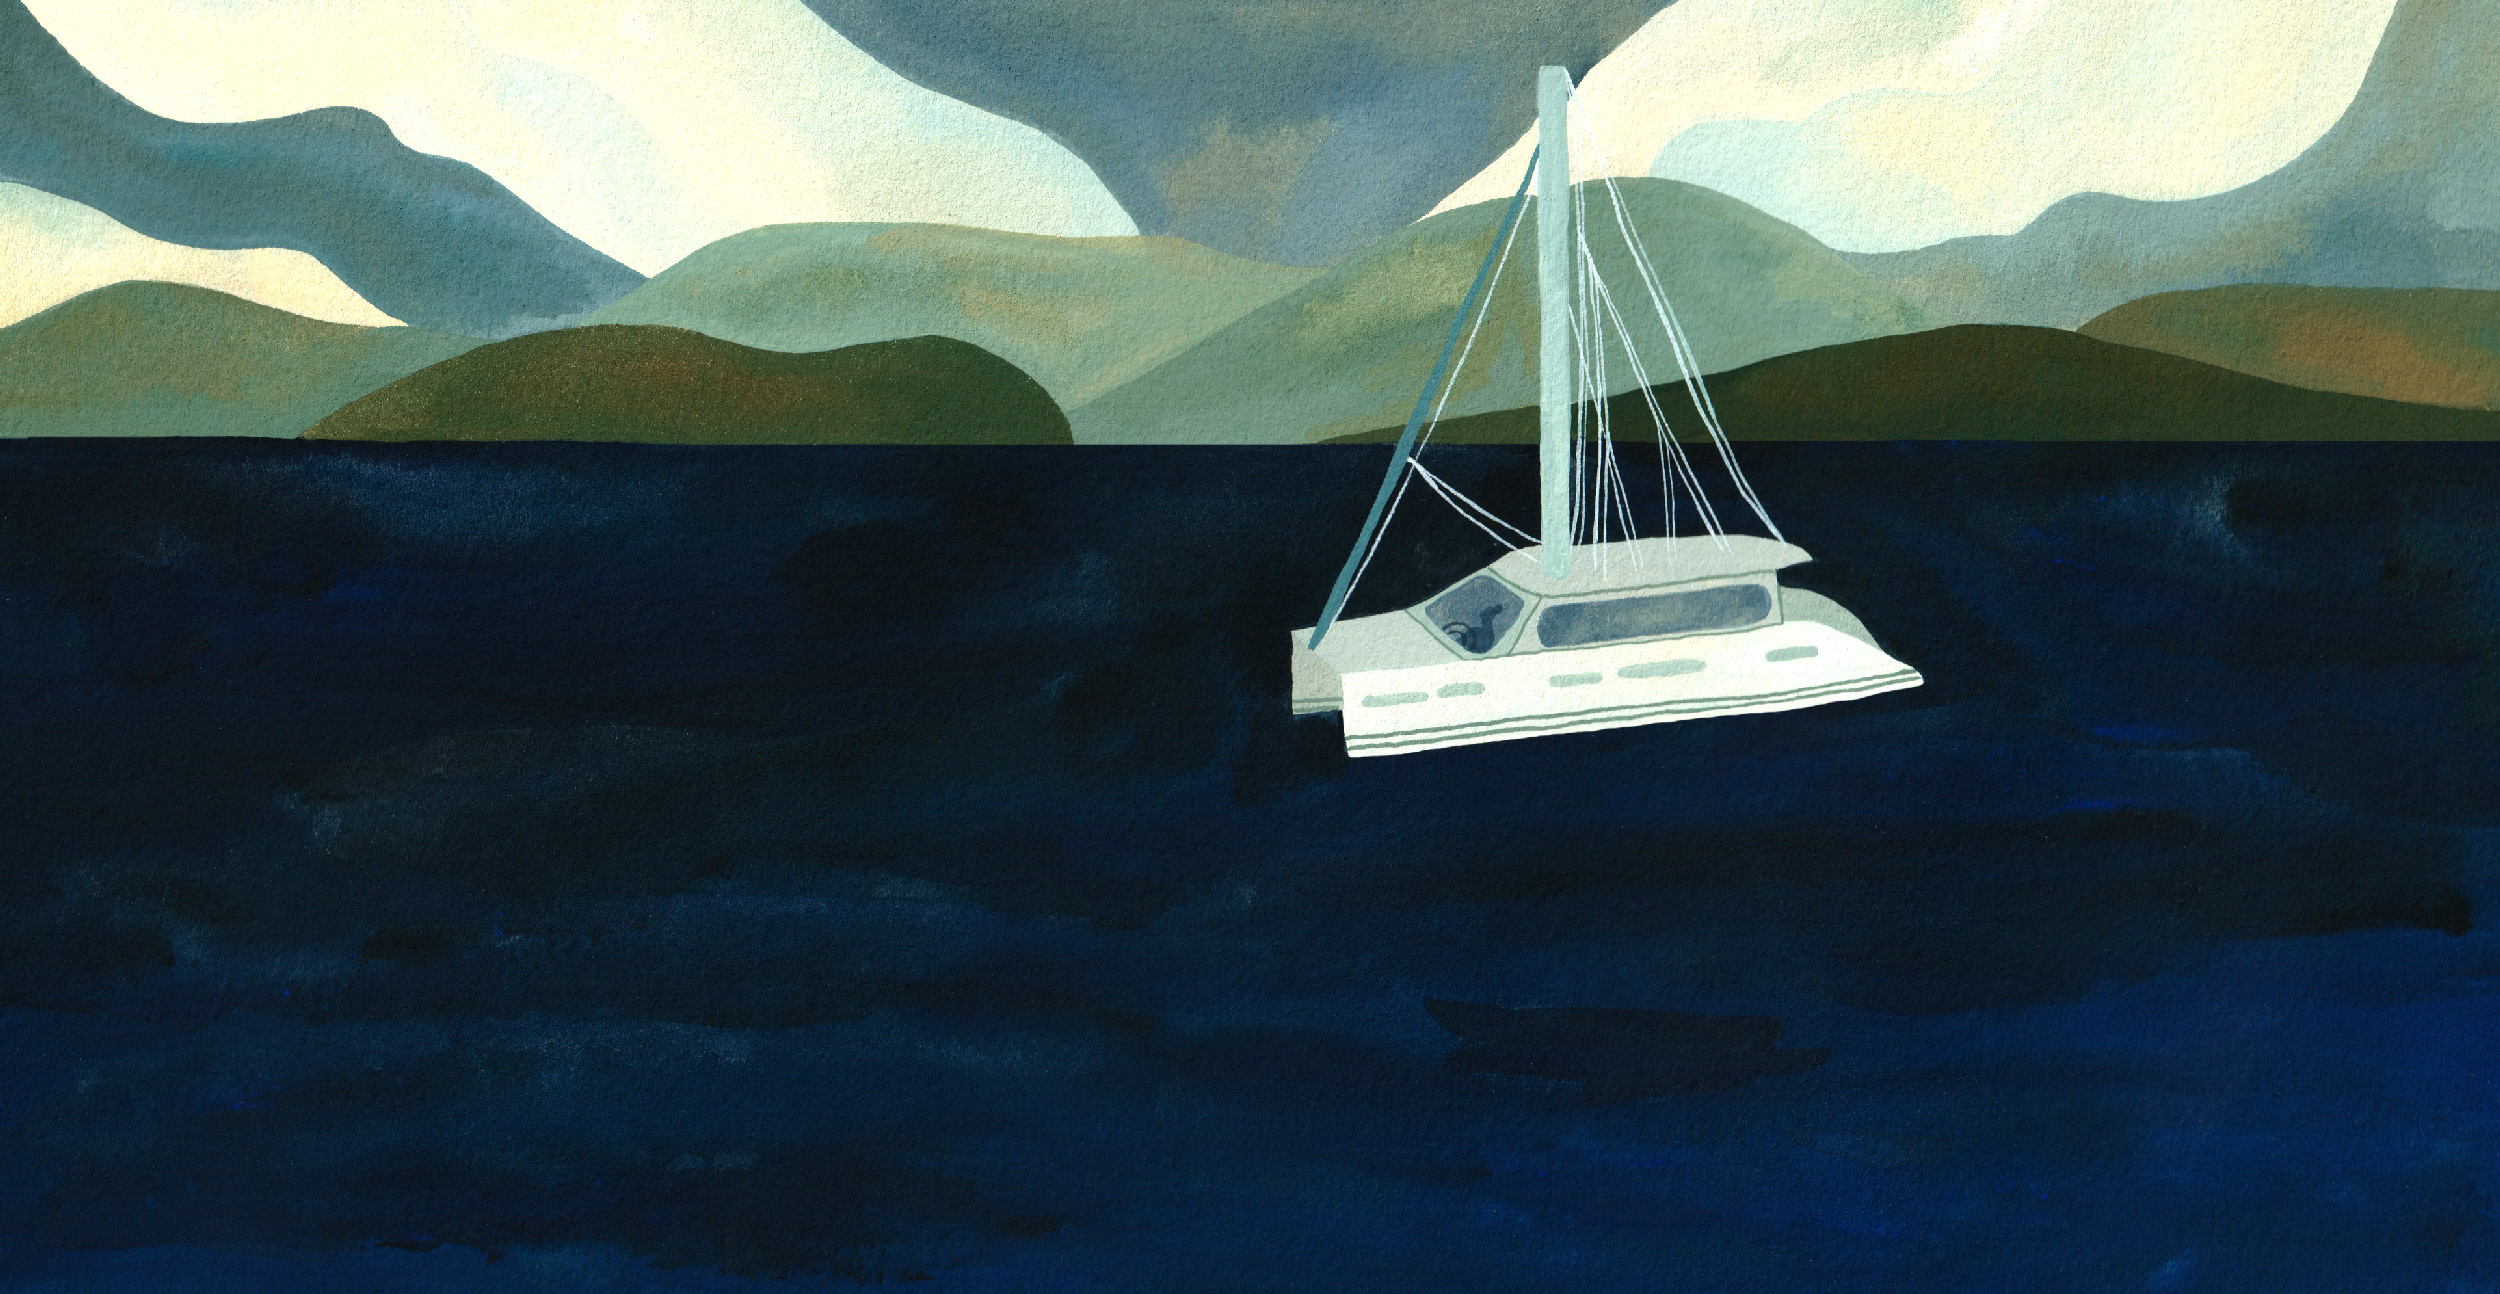 Painting of catamaran on the Ocean with Isalands in the background. Illustration by Eryn Lougheed for The Narwhal's investigation into allegations against Pacific Wild